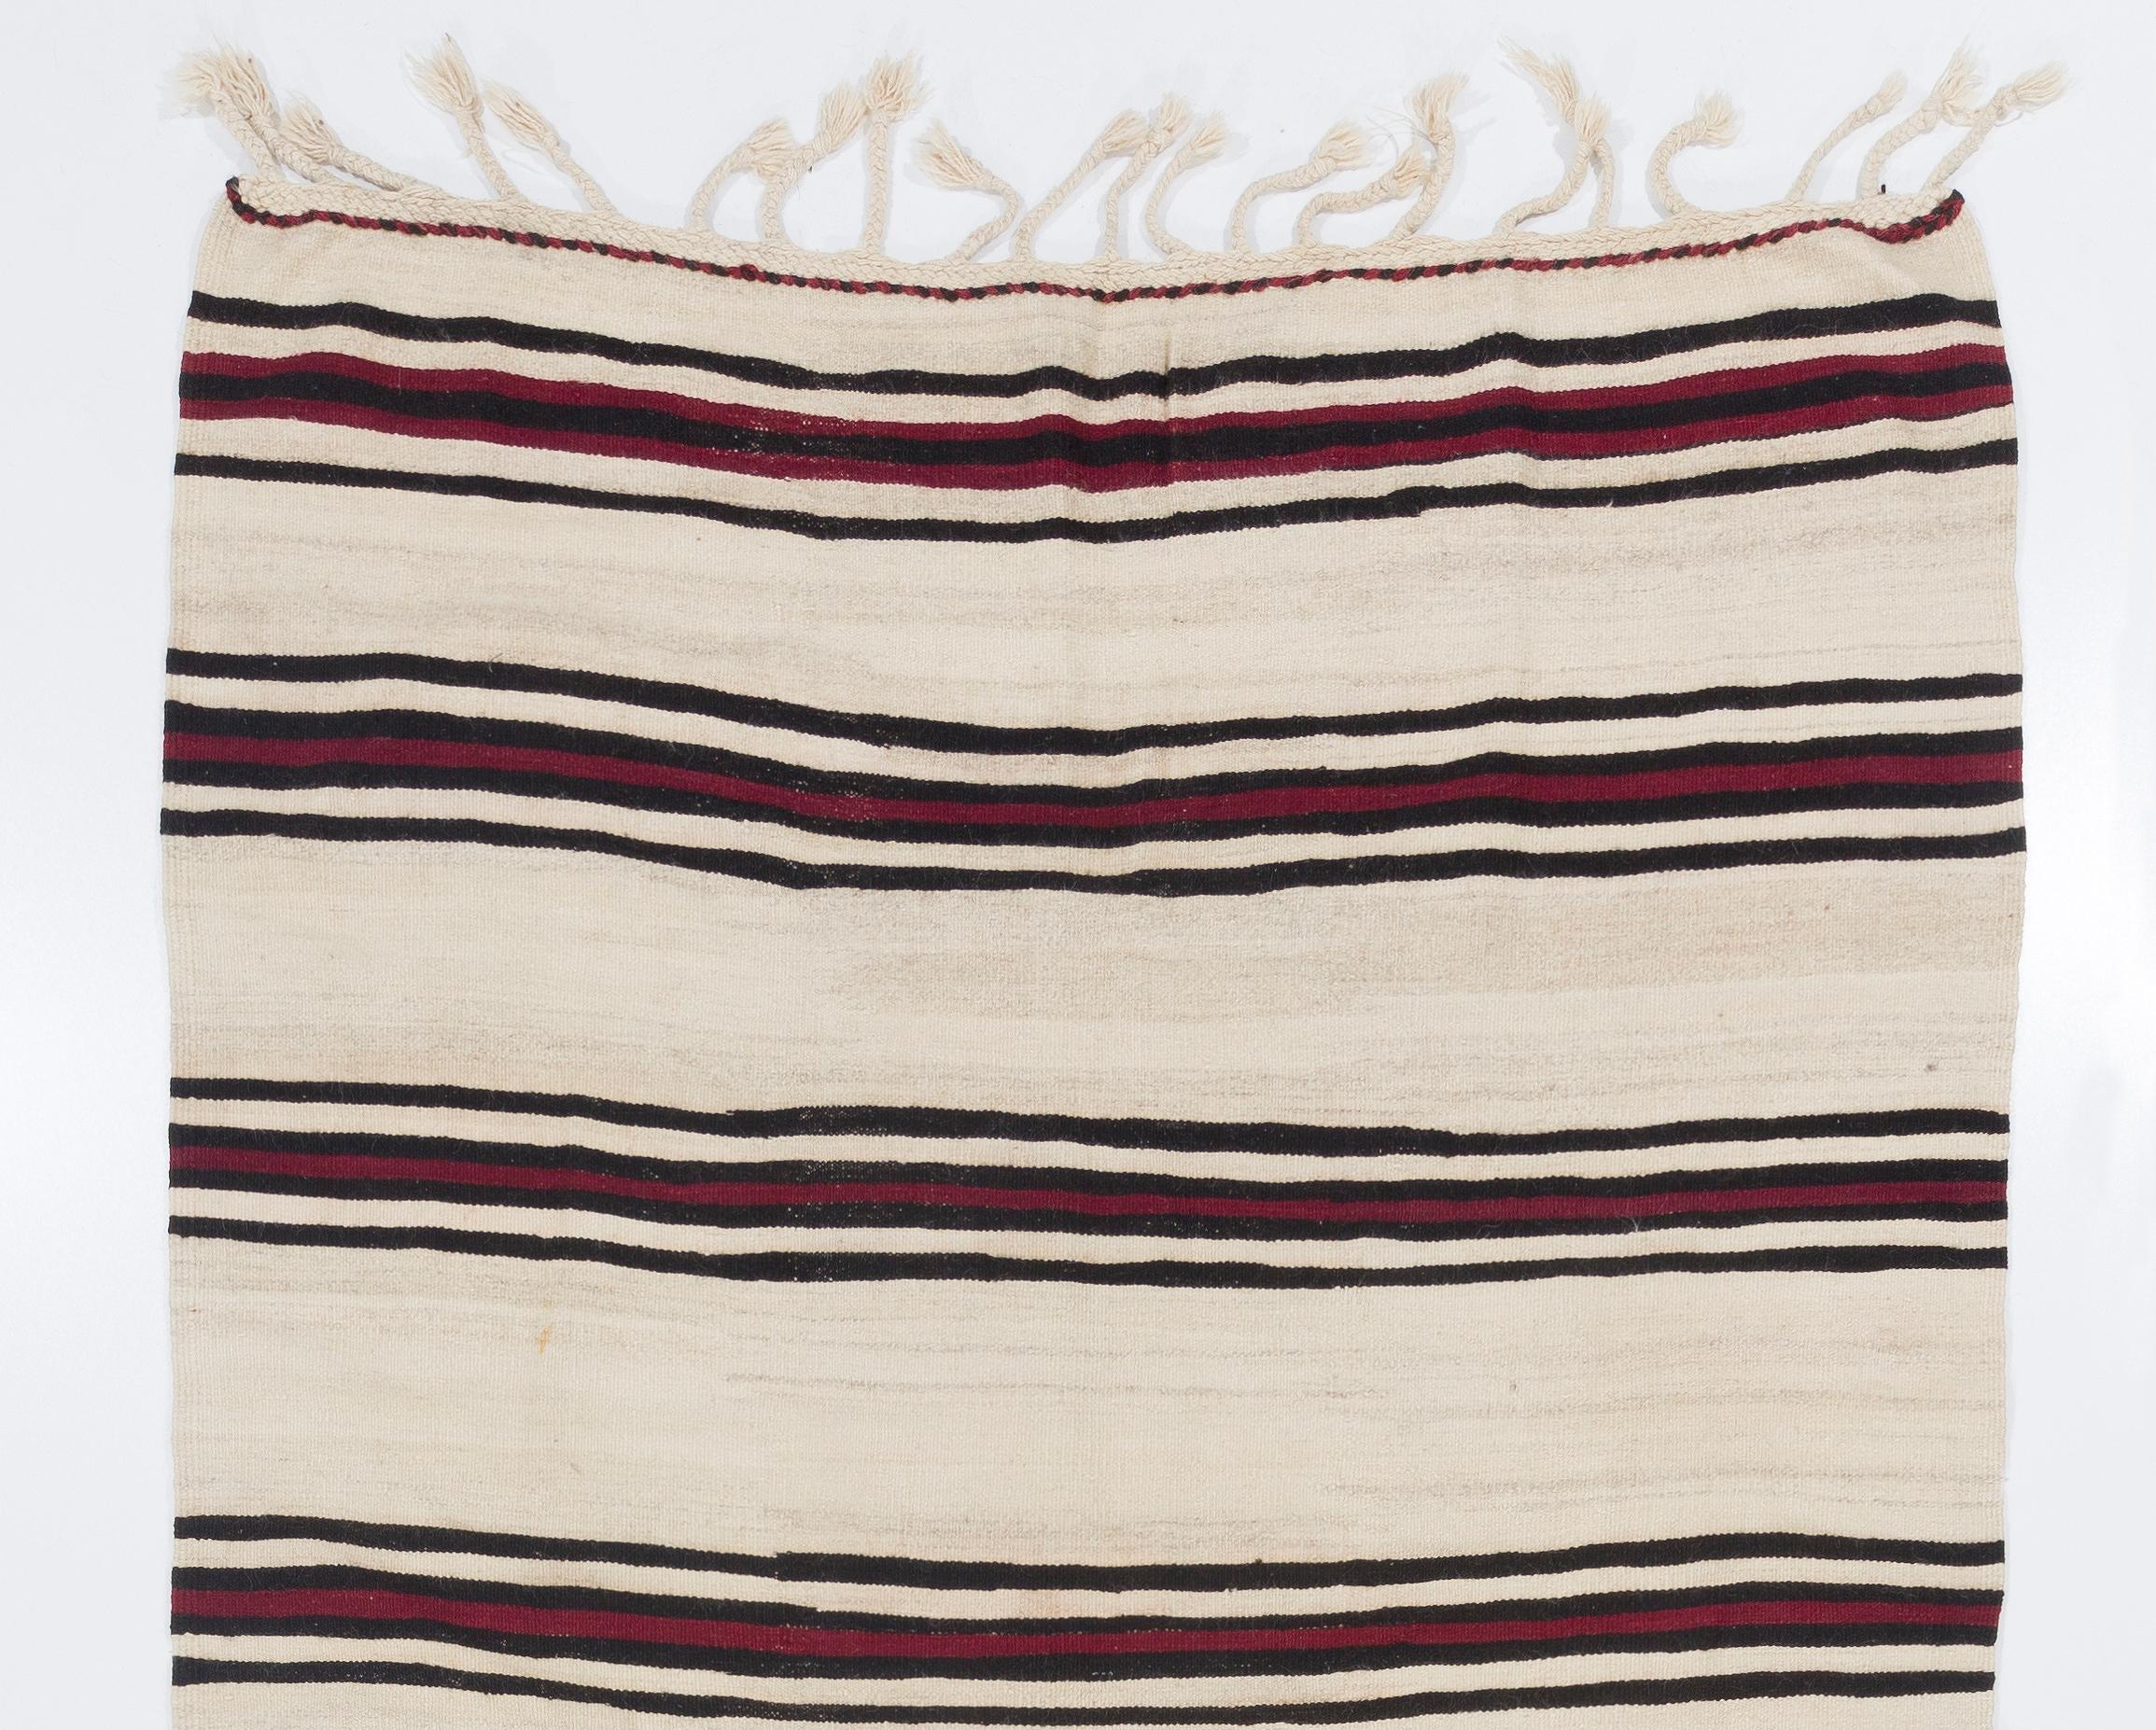 A vintage hand-woven Turkish kilim/flat-weave runner rug from the 1960s with a minimalist aesthetic. It was made entirely of natural, organic sheep's wool and features a simple striped design in brown and dark red against an un-dyed cream